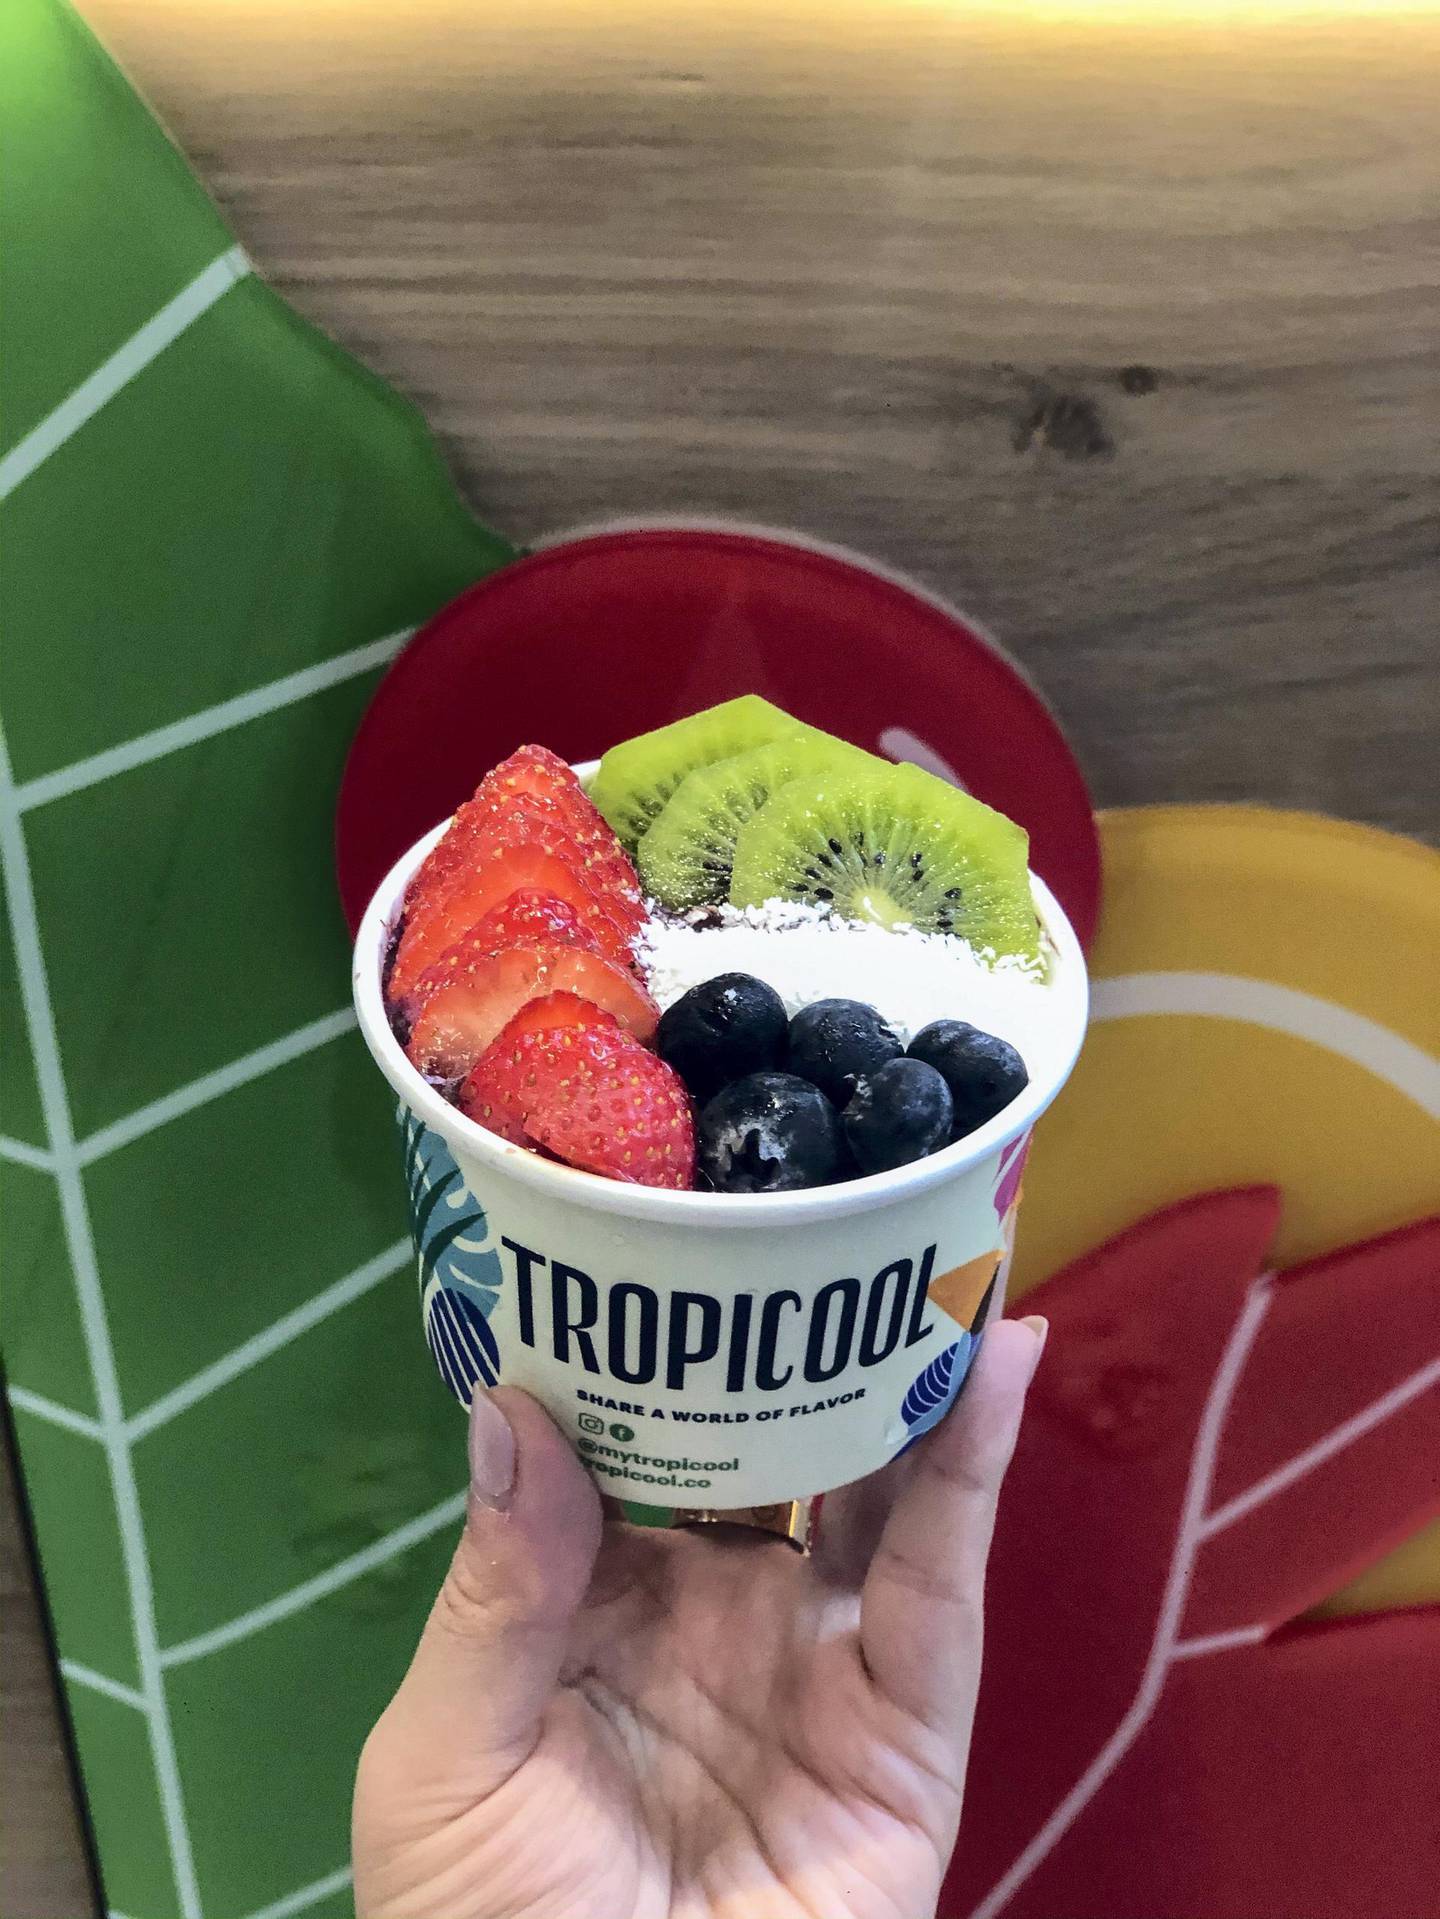 Tropicool has launched National Day-themed bowls. Courtesy of Tropicool